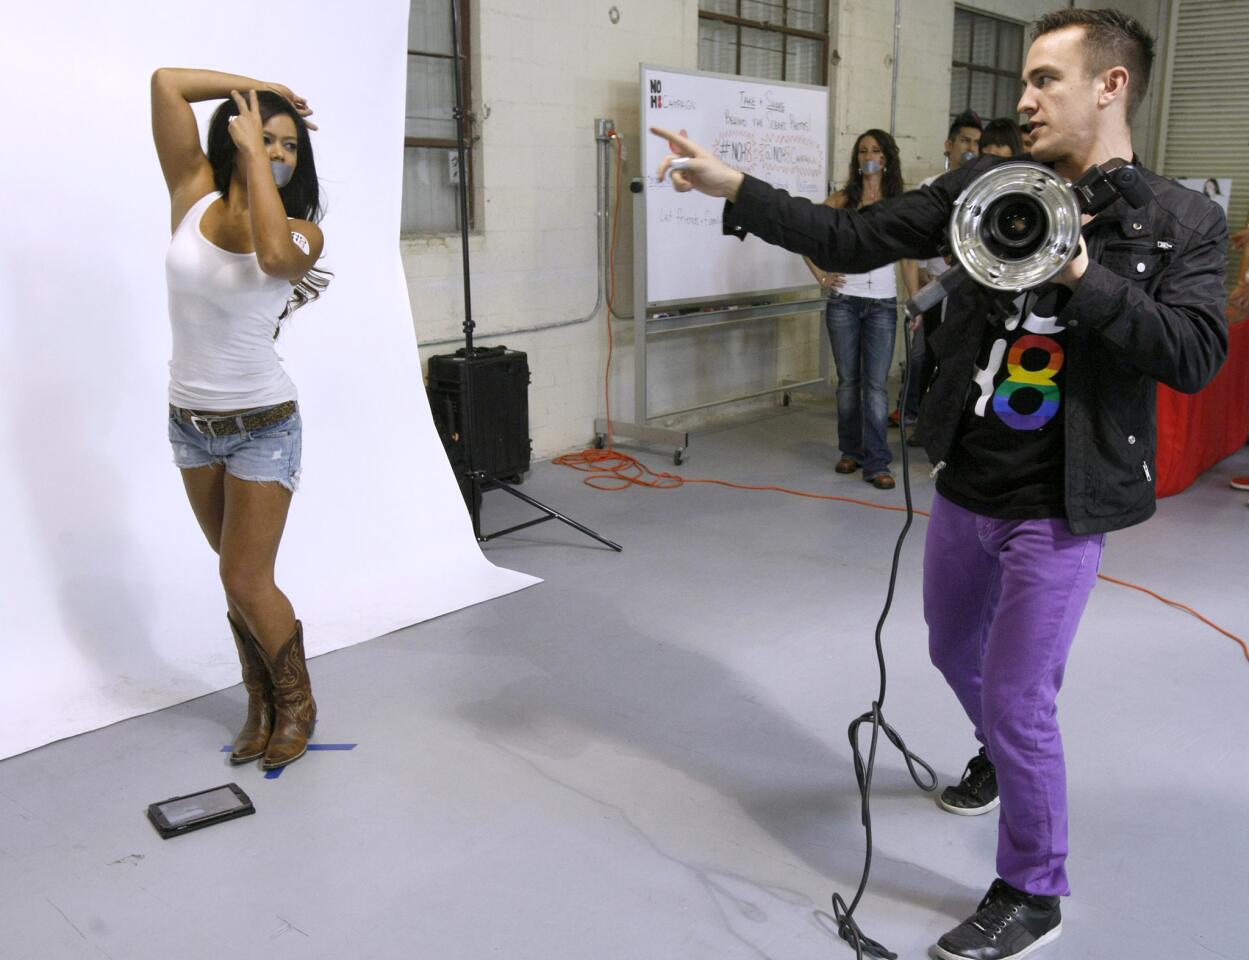 Laura Vol, 30 of Austin Texas, gets direction on posing from celebrity photographer/NOH8 cofounder Adam Bouska during public photo session at the Burbank headquarters on Saturday, Feb. 22, 2014.